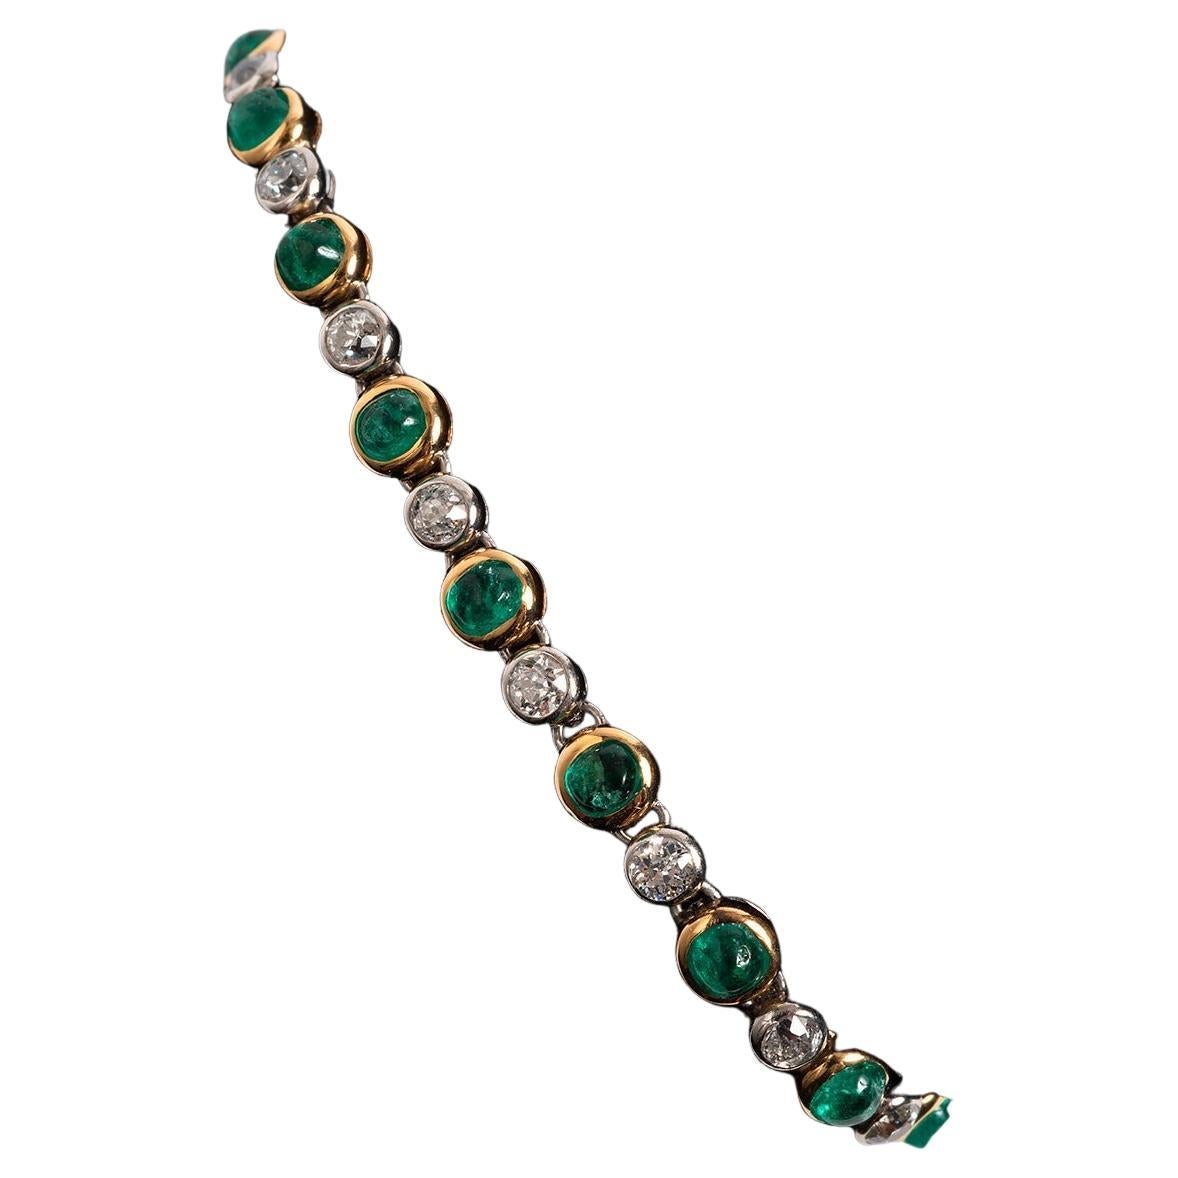 A unique piece within our carefully curated Vintage & Prestige fine jewellery collection, we are delighted to present the following:

This is an exceptionally rare piece, a French art nouveau bracelet of 18k yellow gold, set with 17 cabochon